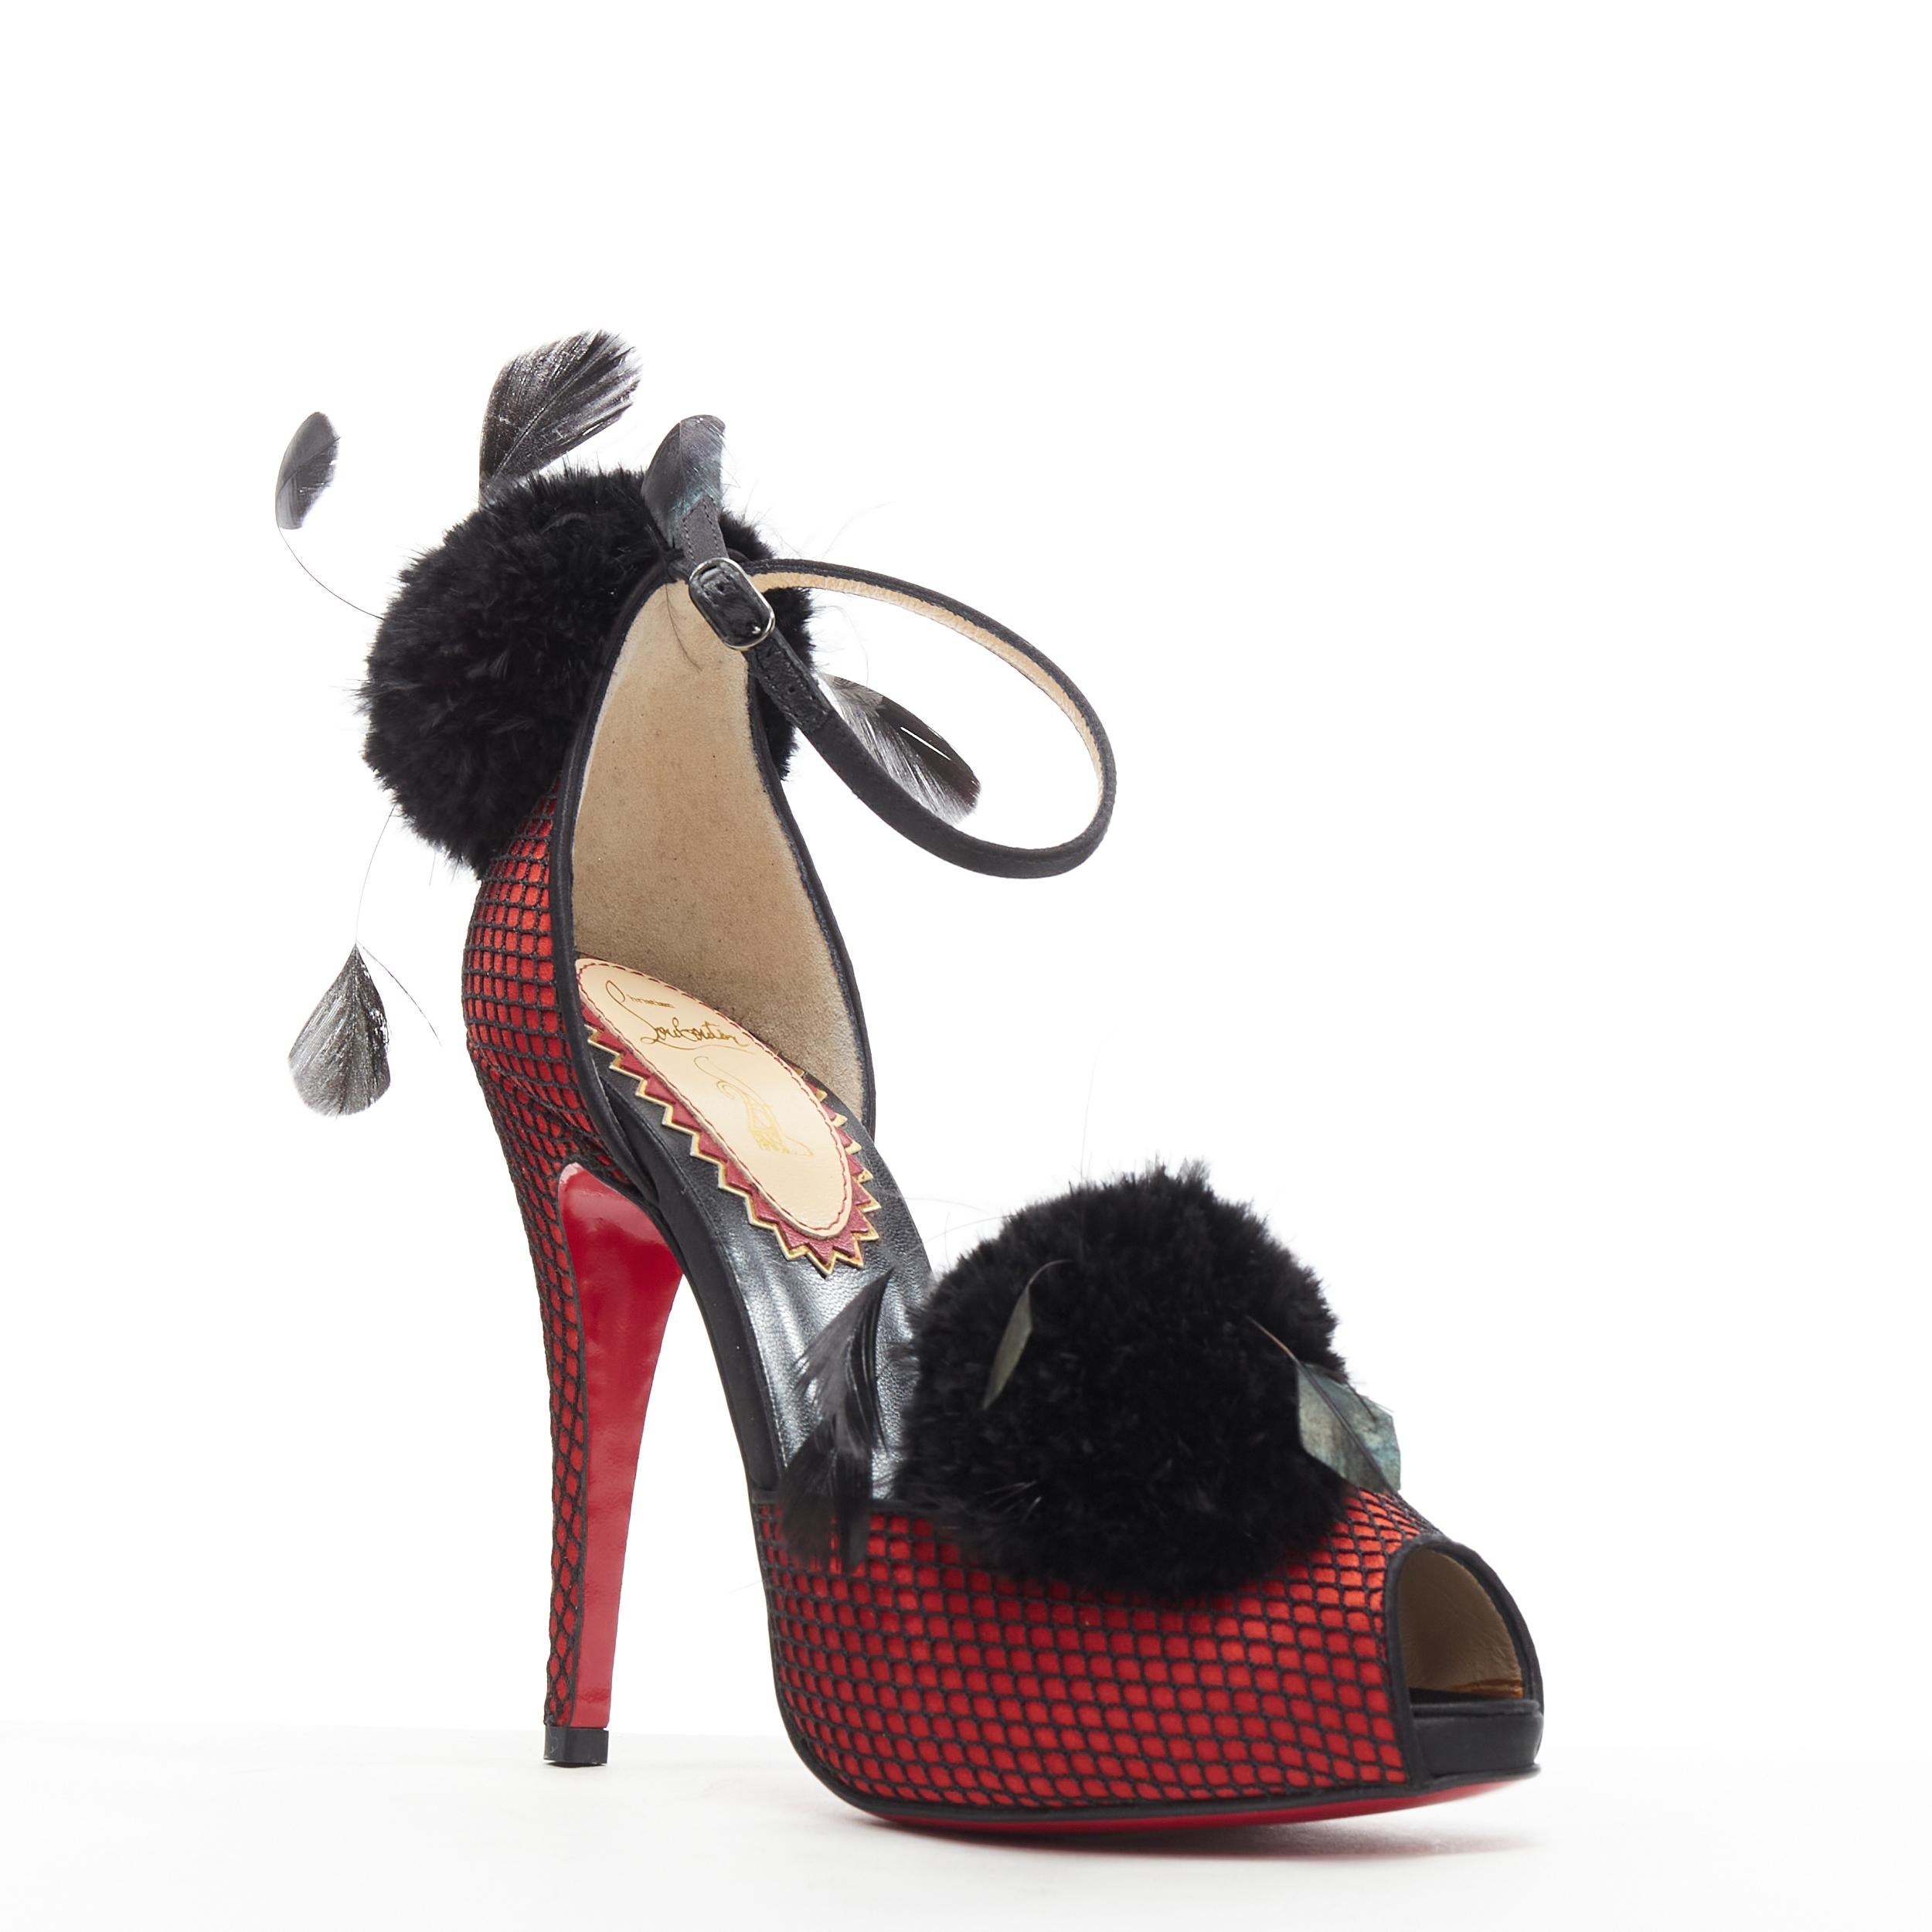 new CHRISTIAN LOUBOUTIN Pluminette red fishnet feather pom peep toe heel EU35.5 
Reference: TGAS/B00798 
Brand: Christian Louboutin 
Designer: Christian Louboutin 
Model: Pluminette 
Material: Silk 
Color: Red 
Closure: Ankle strap 
Extra Detail: